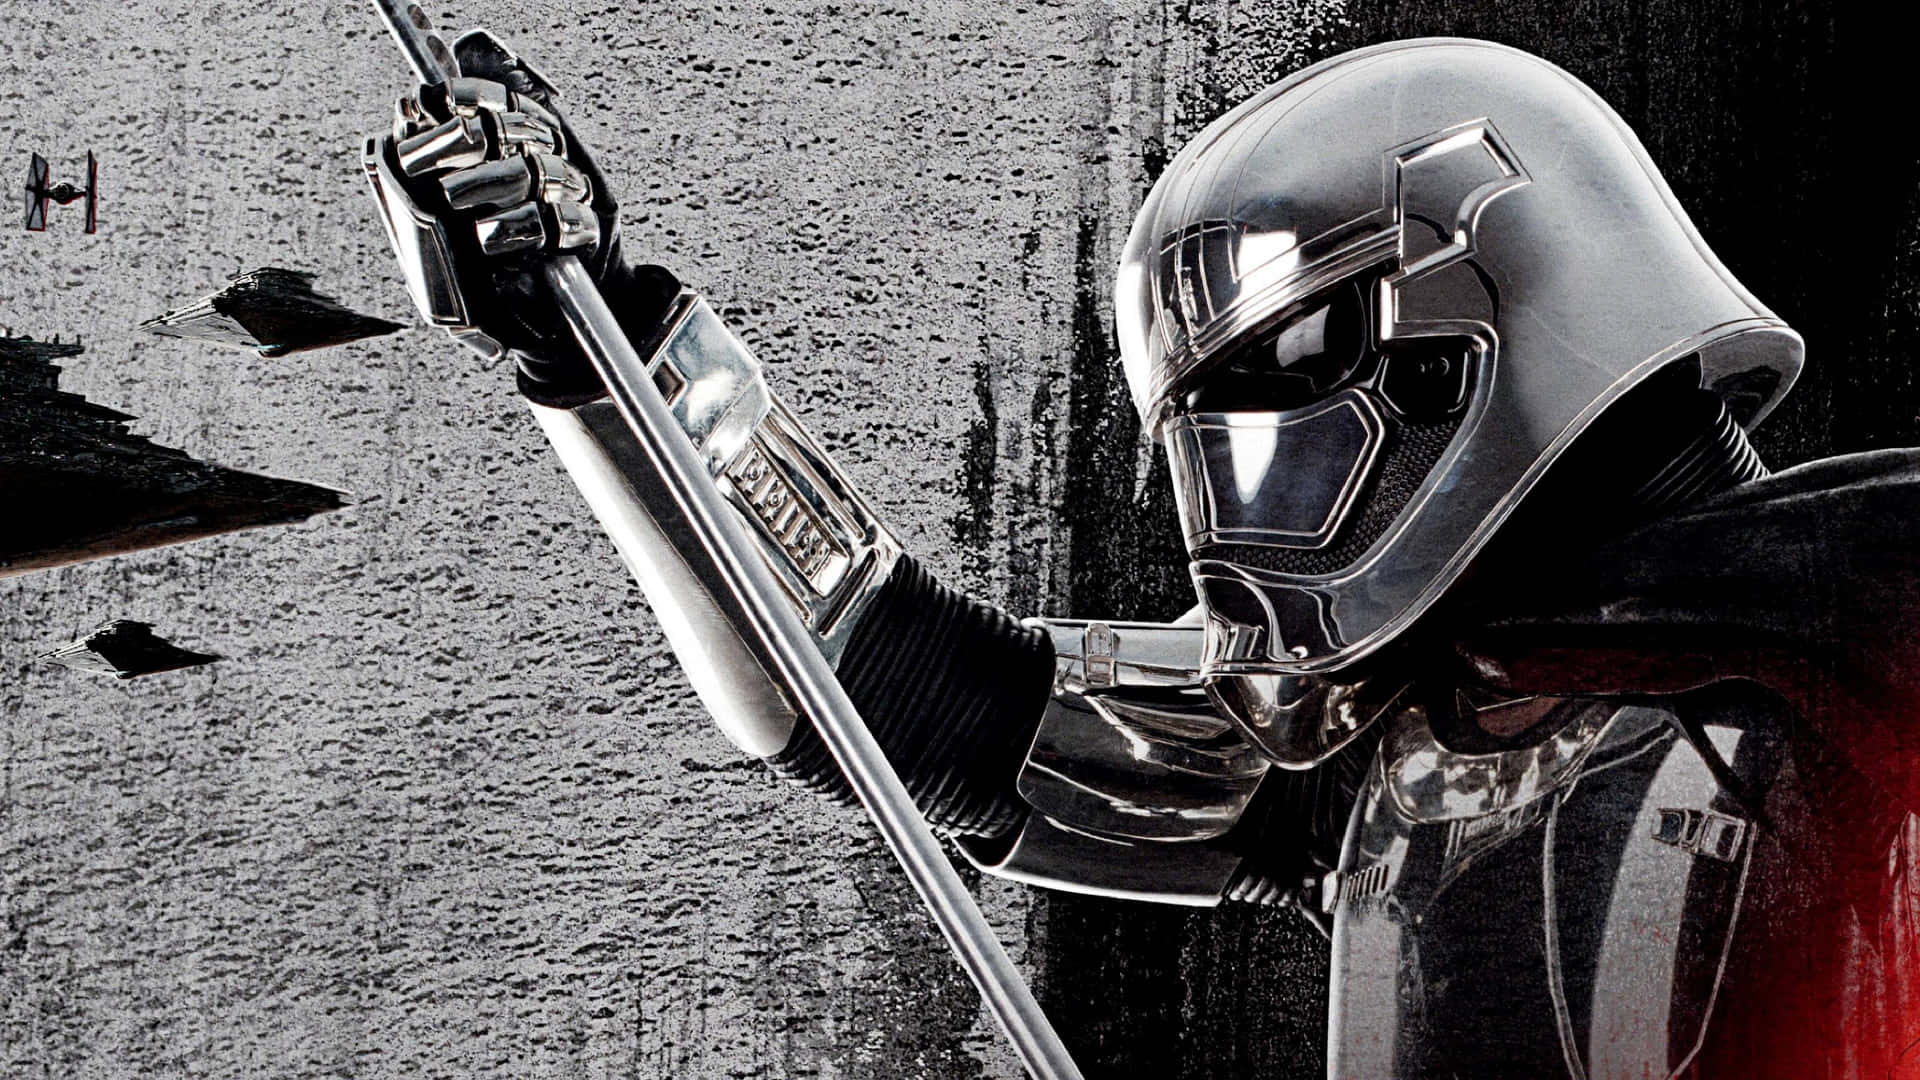 Captain Phasma in Battle: Leader of the Stormtroopers Wallpaper